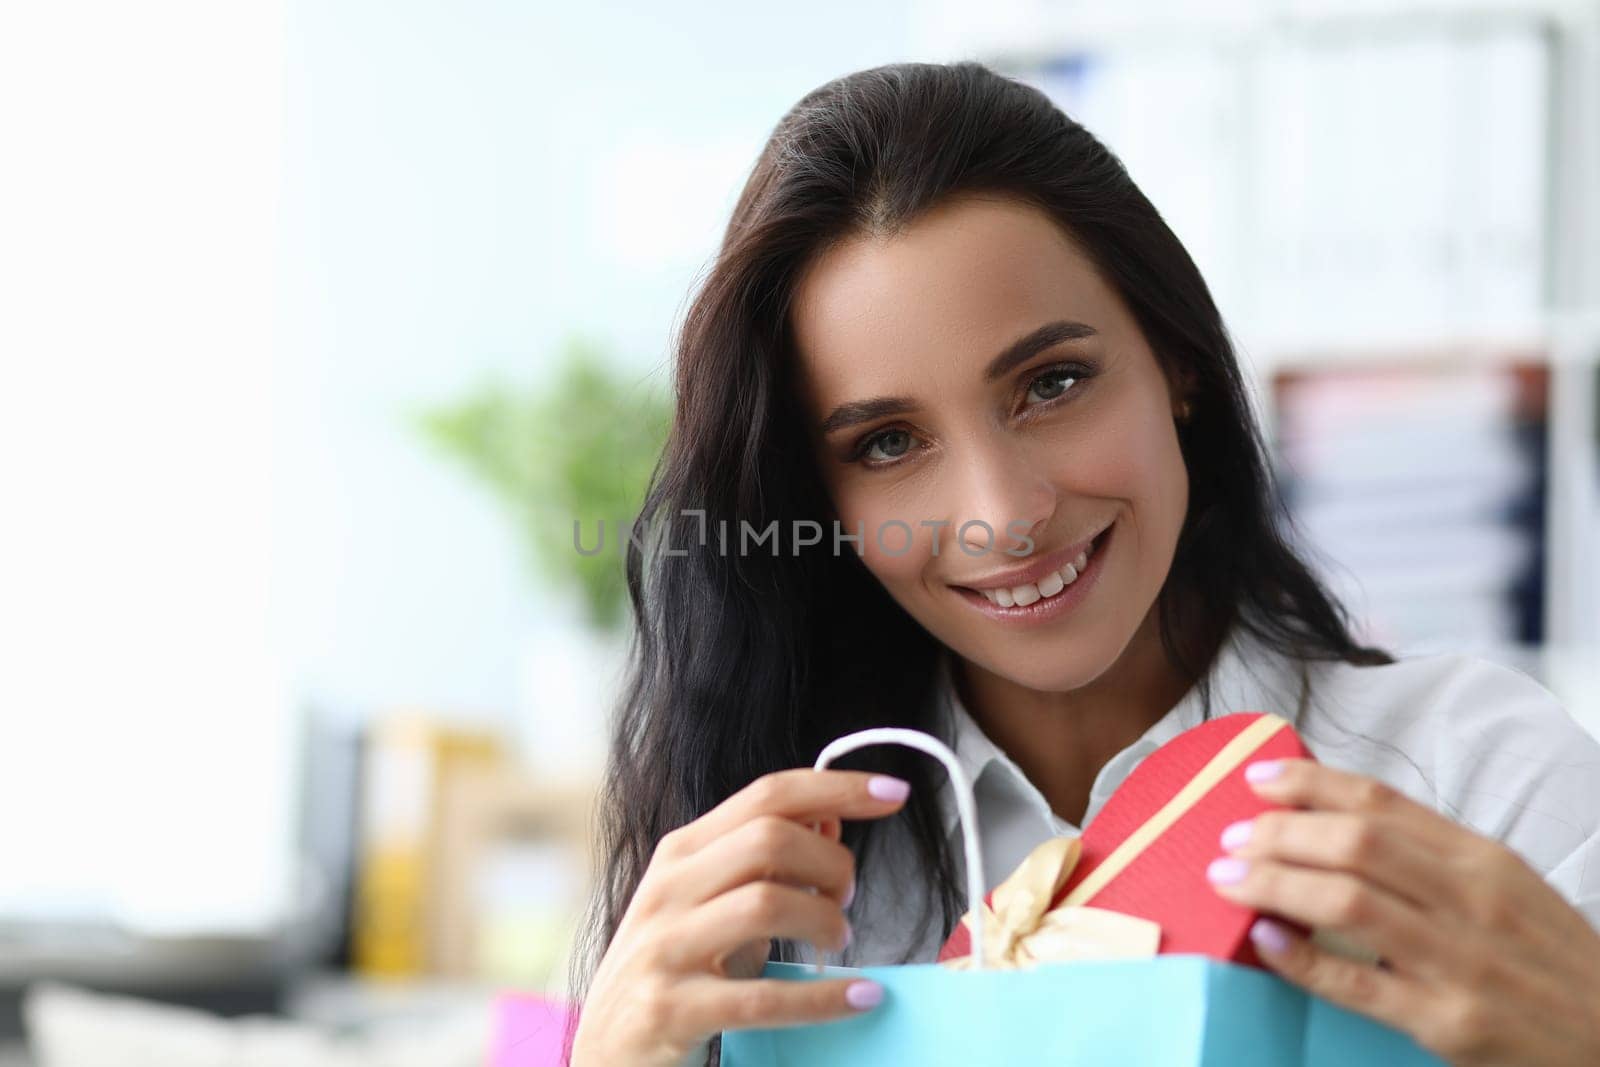 Smiling beautiful woman takes out gift from package. Surprises and gifts for woman concept